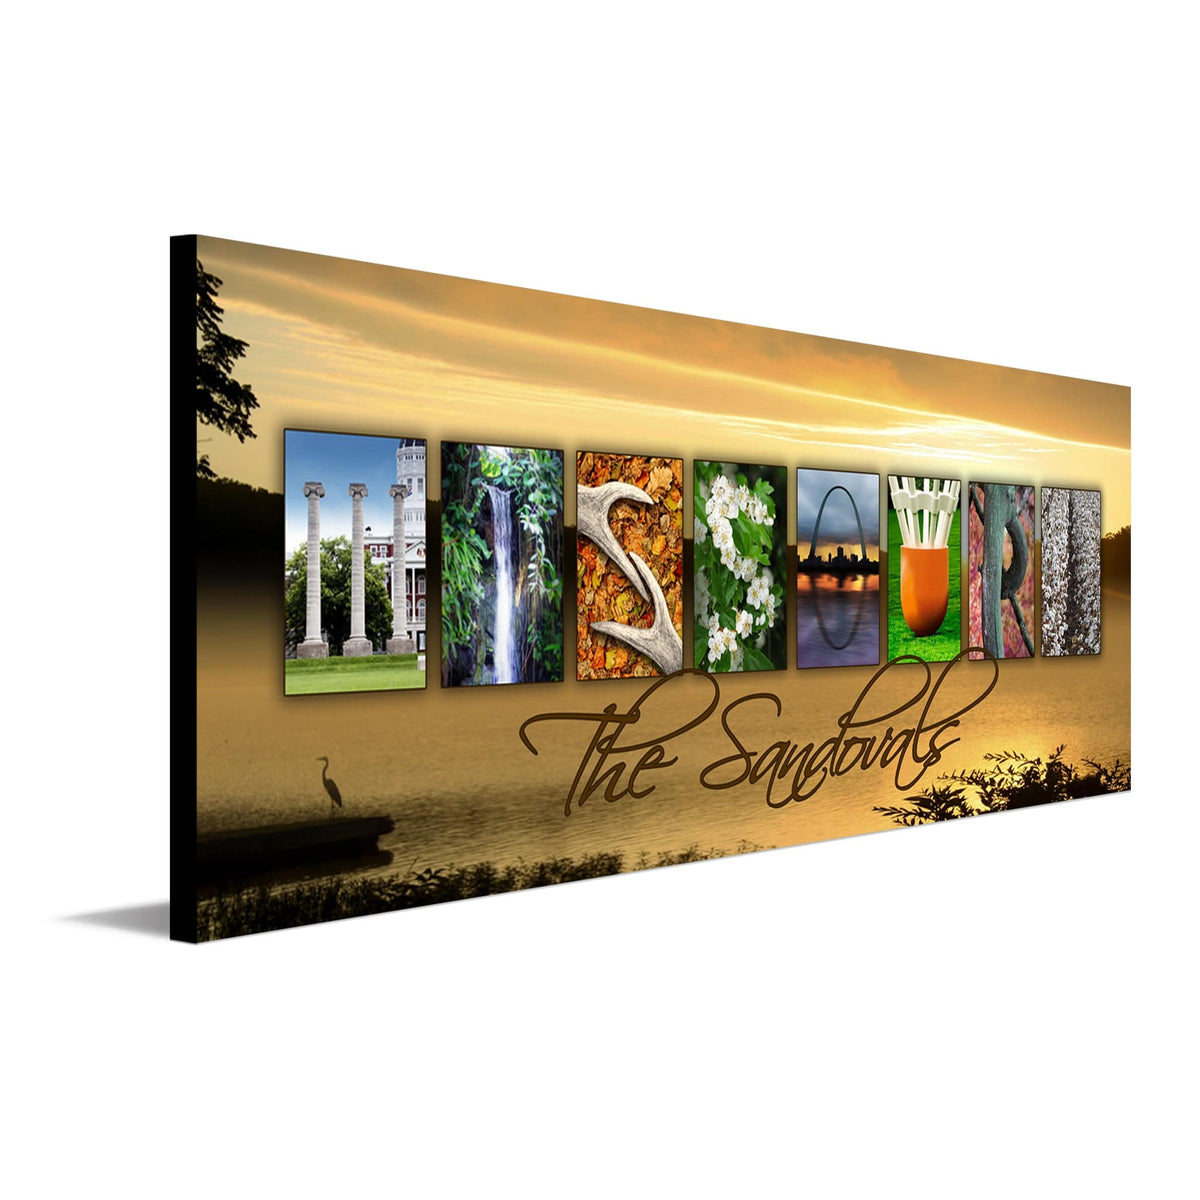 Personalized Missouri state art that uses photographs from the state to spell the word Missouri - Personal-Prints